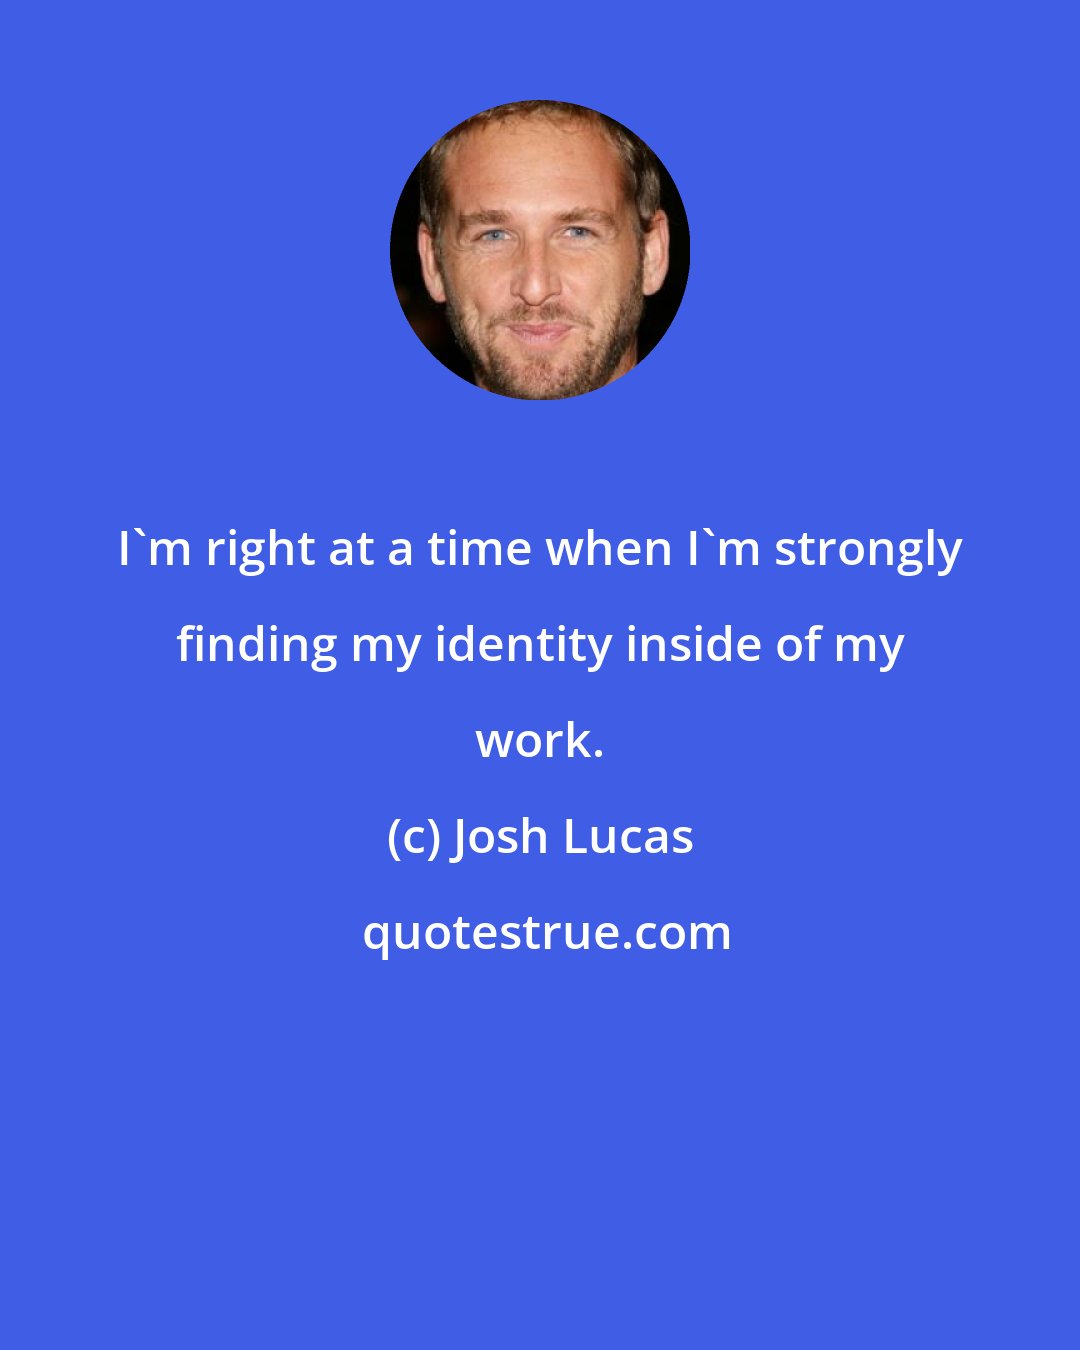 Josh Lucas: I'm right at a time when I'm strongly finding my identity inside of my work.